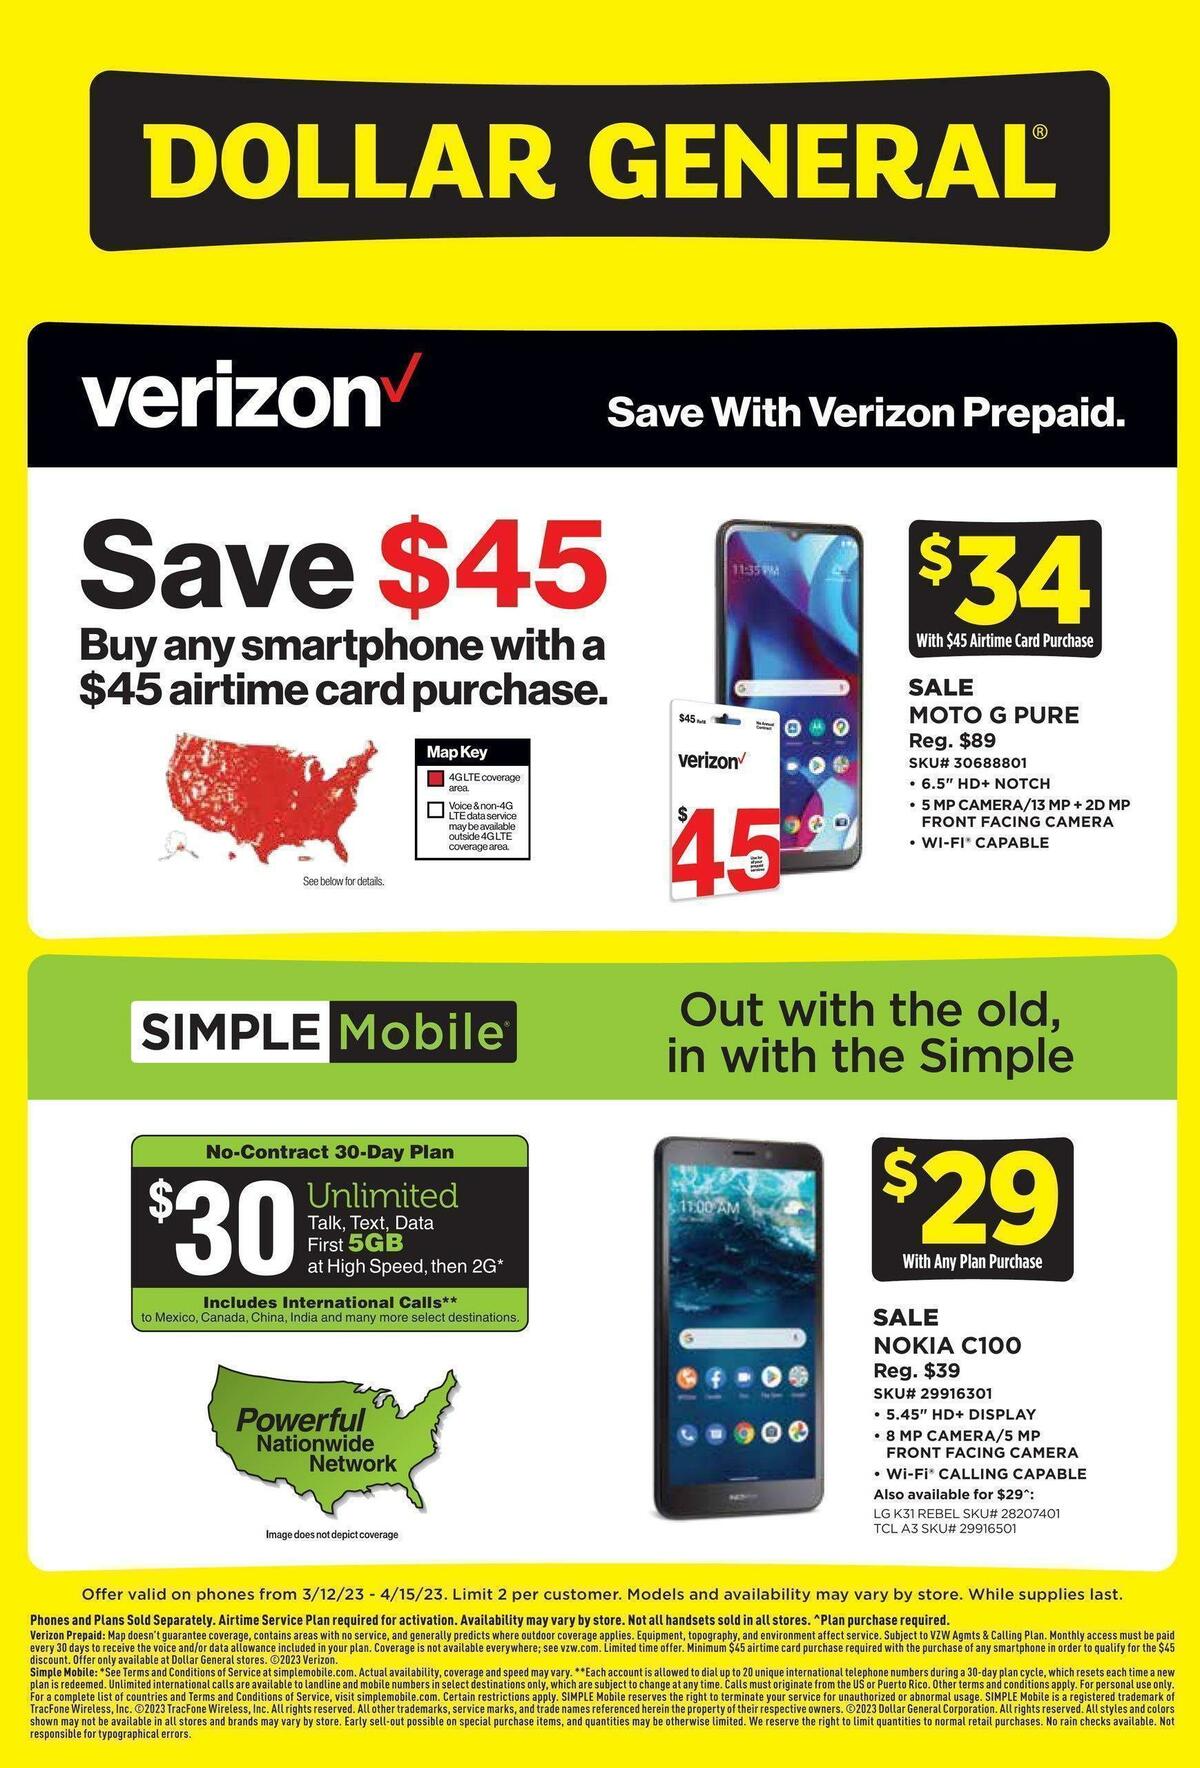 Dollar General Weekly Wireless Specials Weekly Ad from March 12